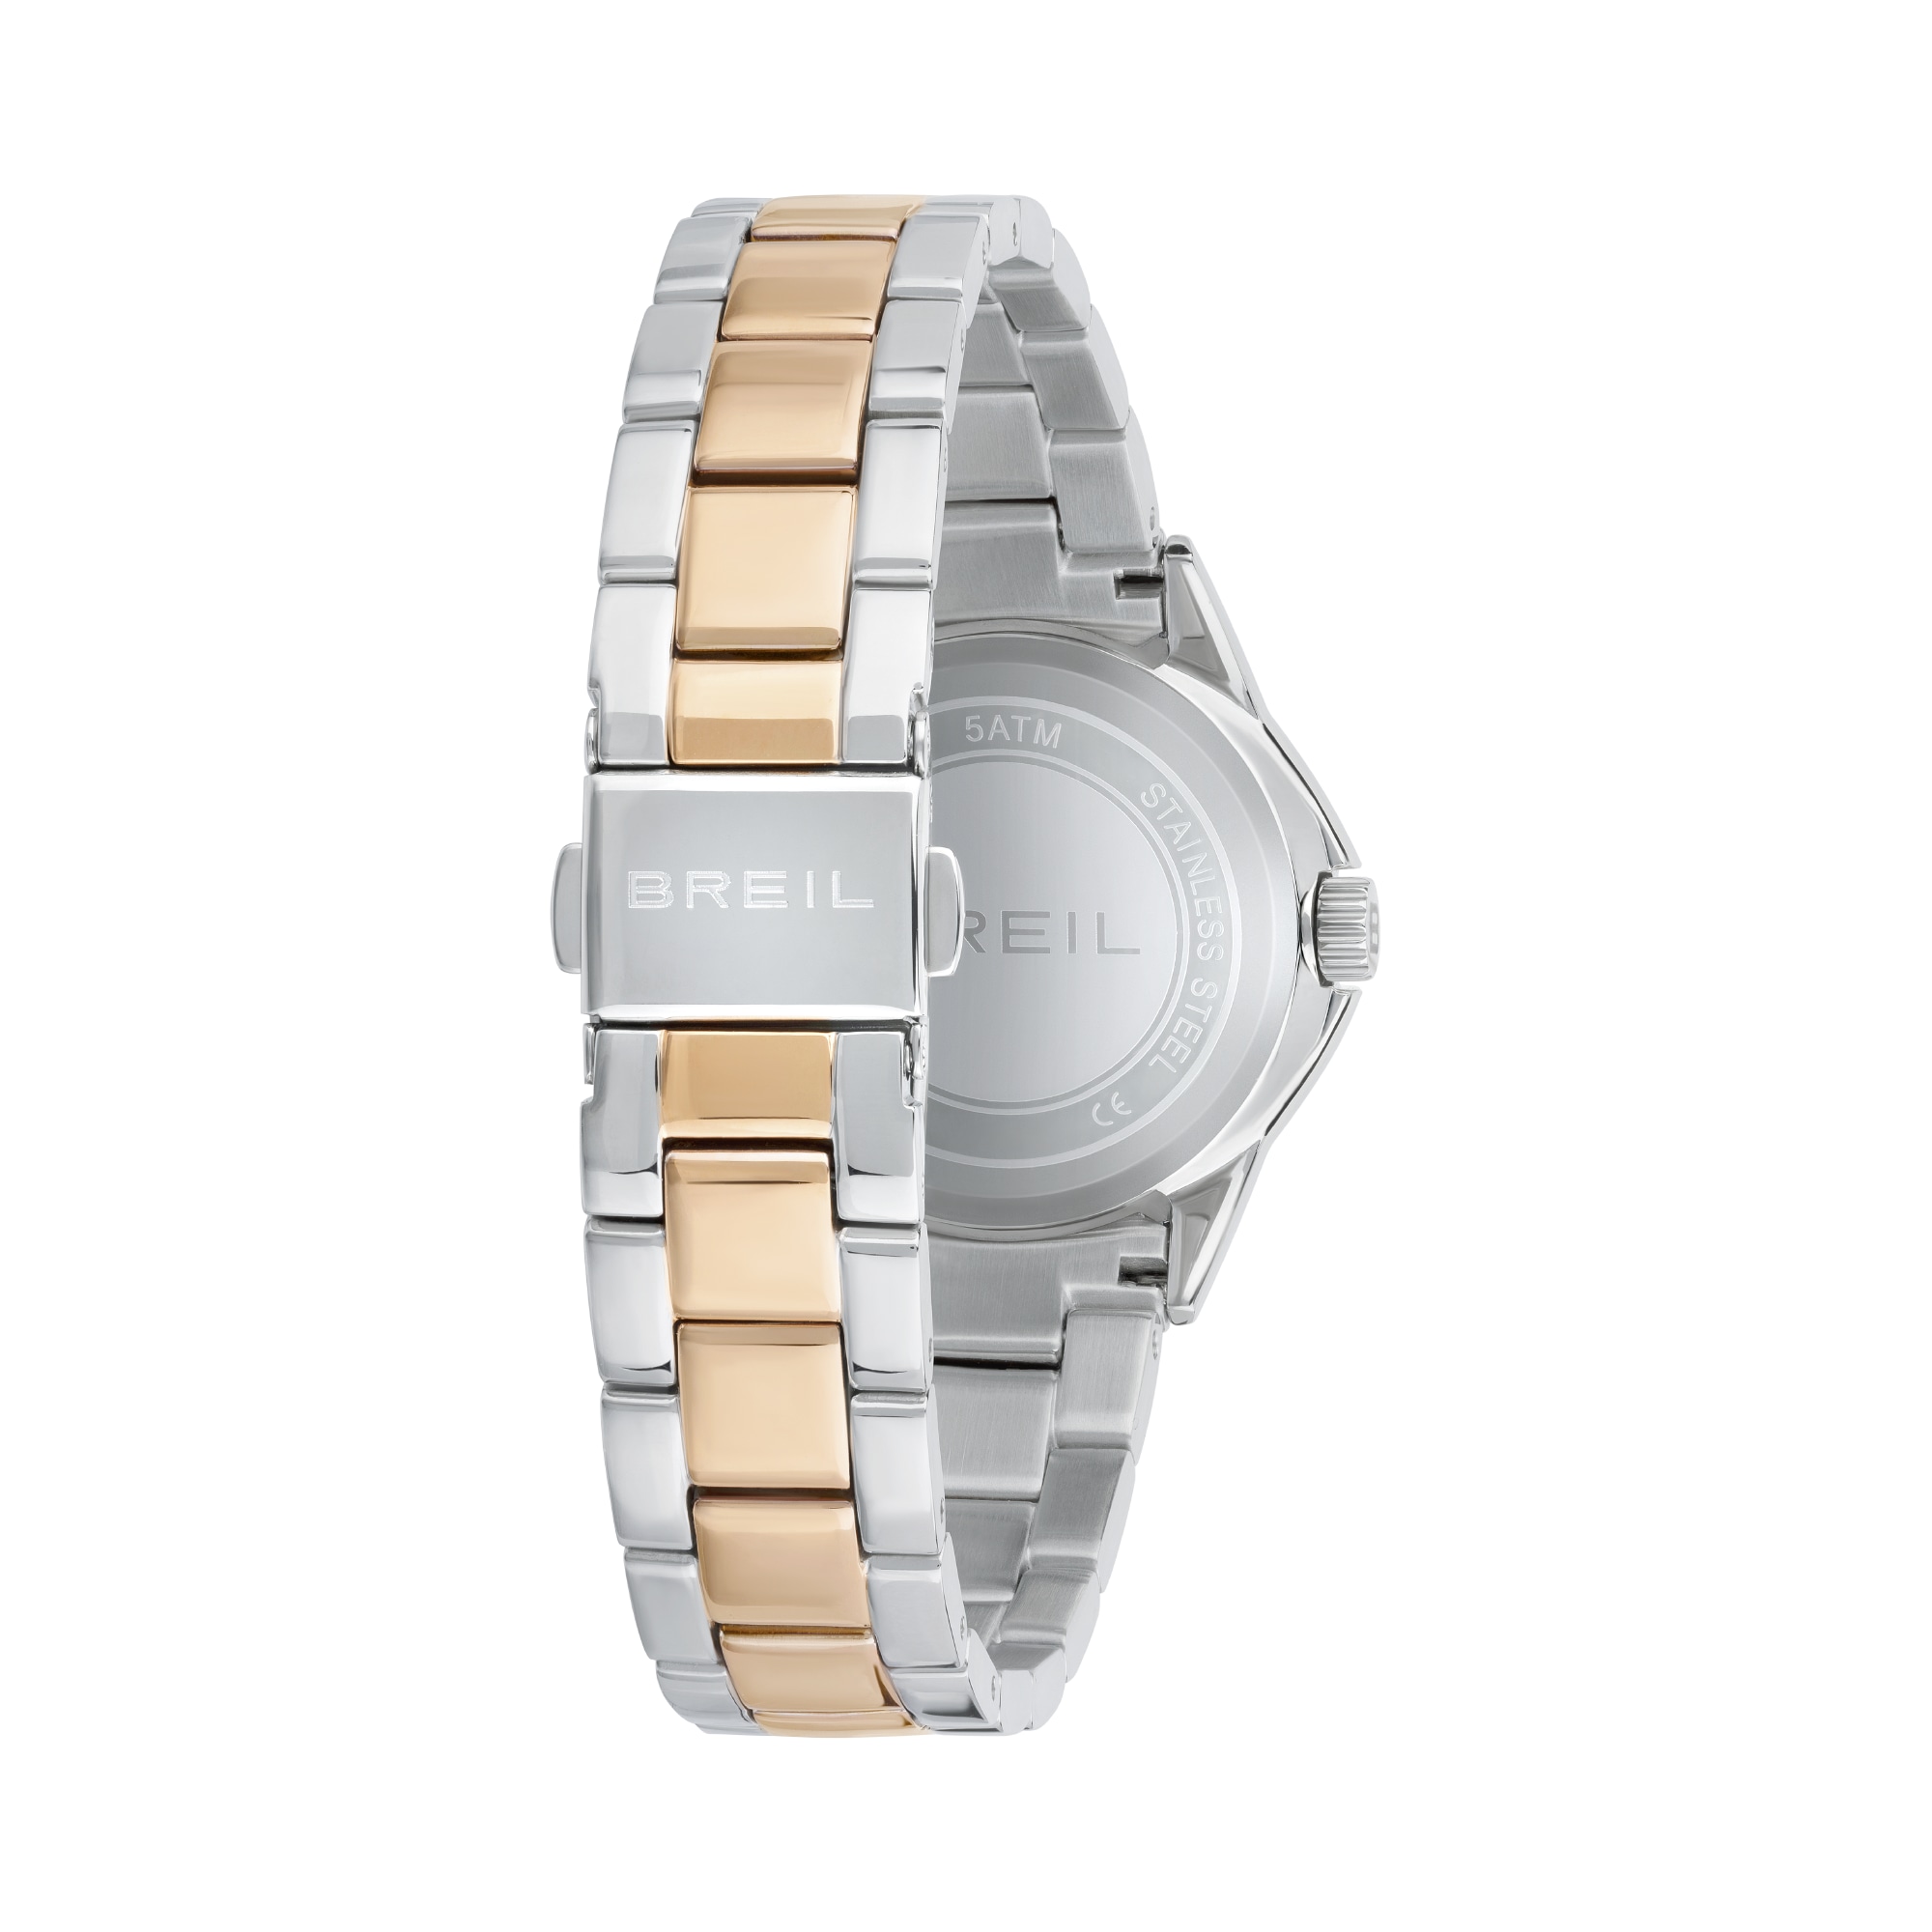 SHIMMERY - SOLO TEMPO LADY 31 MM - 3 - TW1939 | Breil